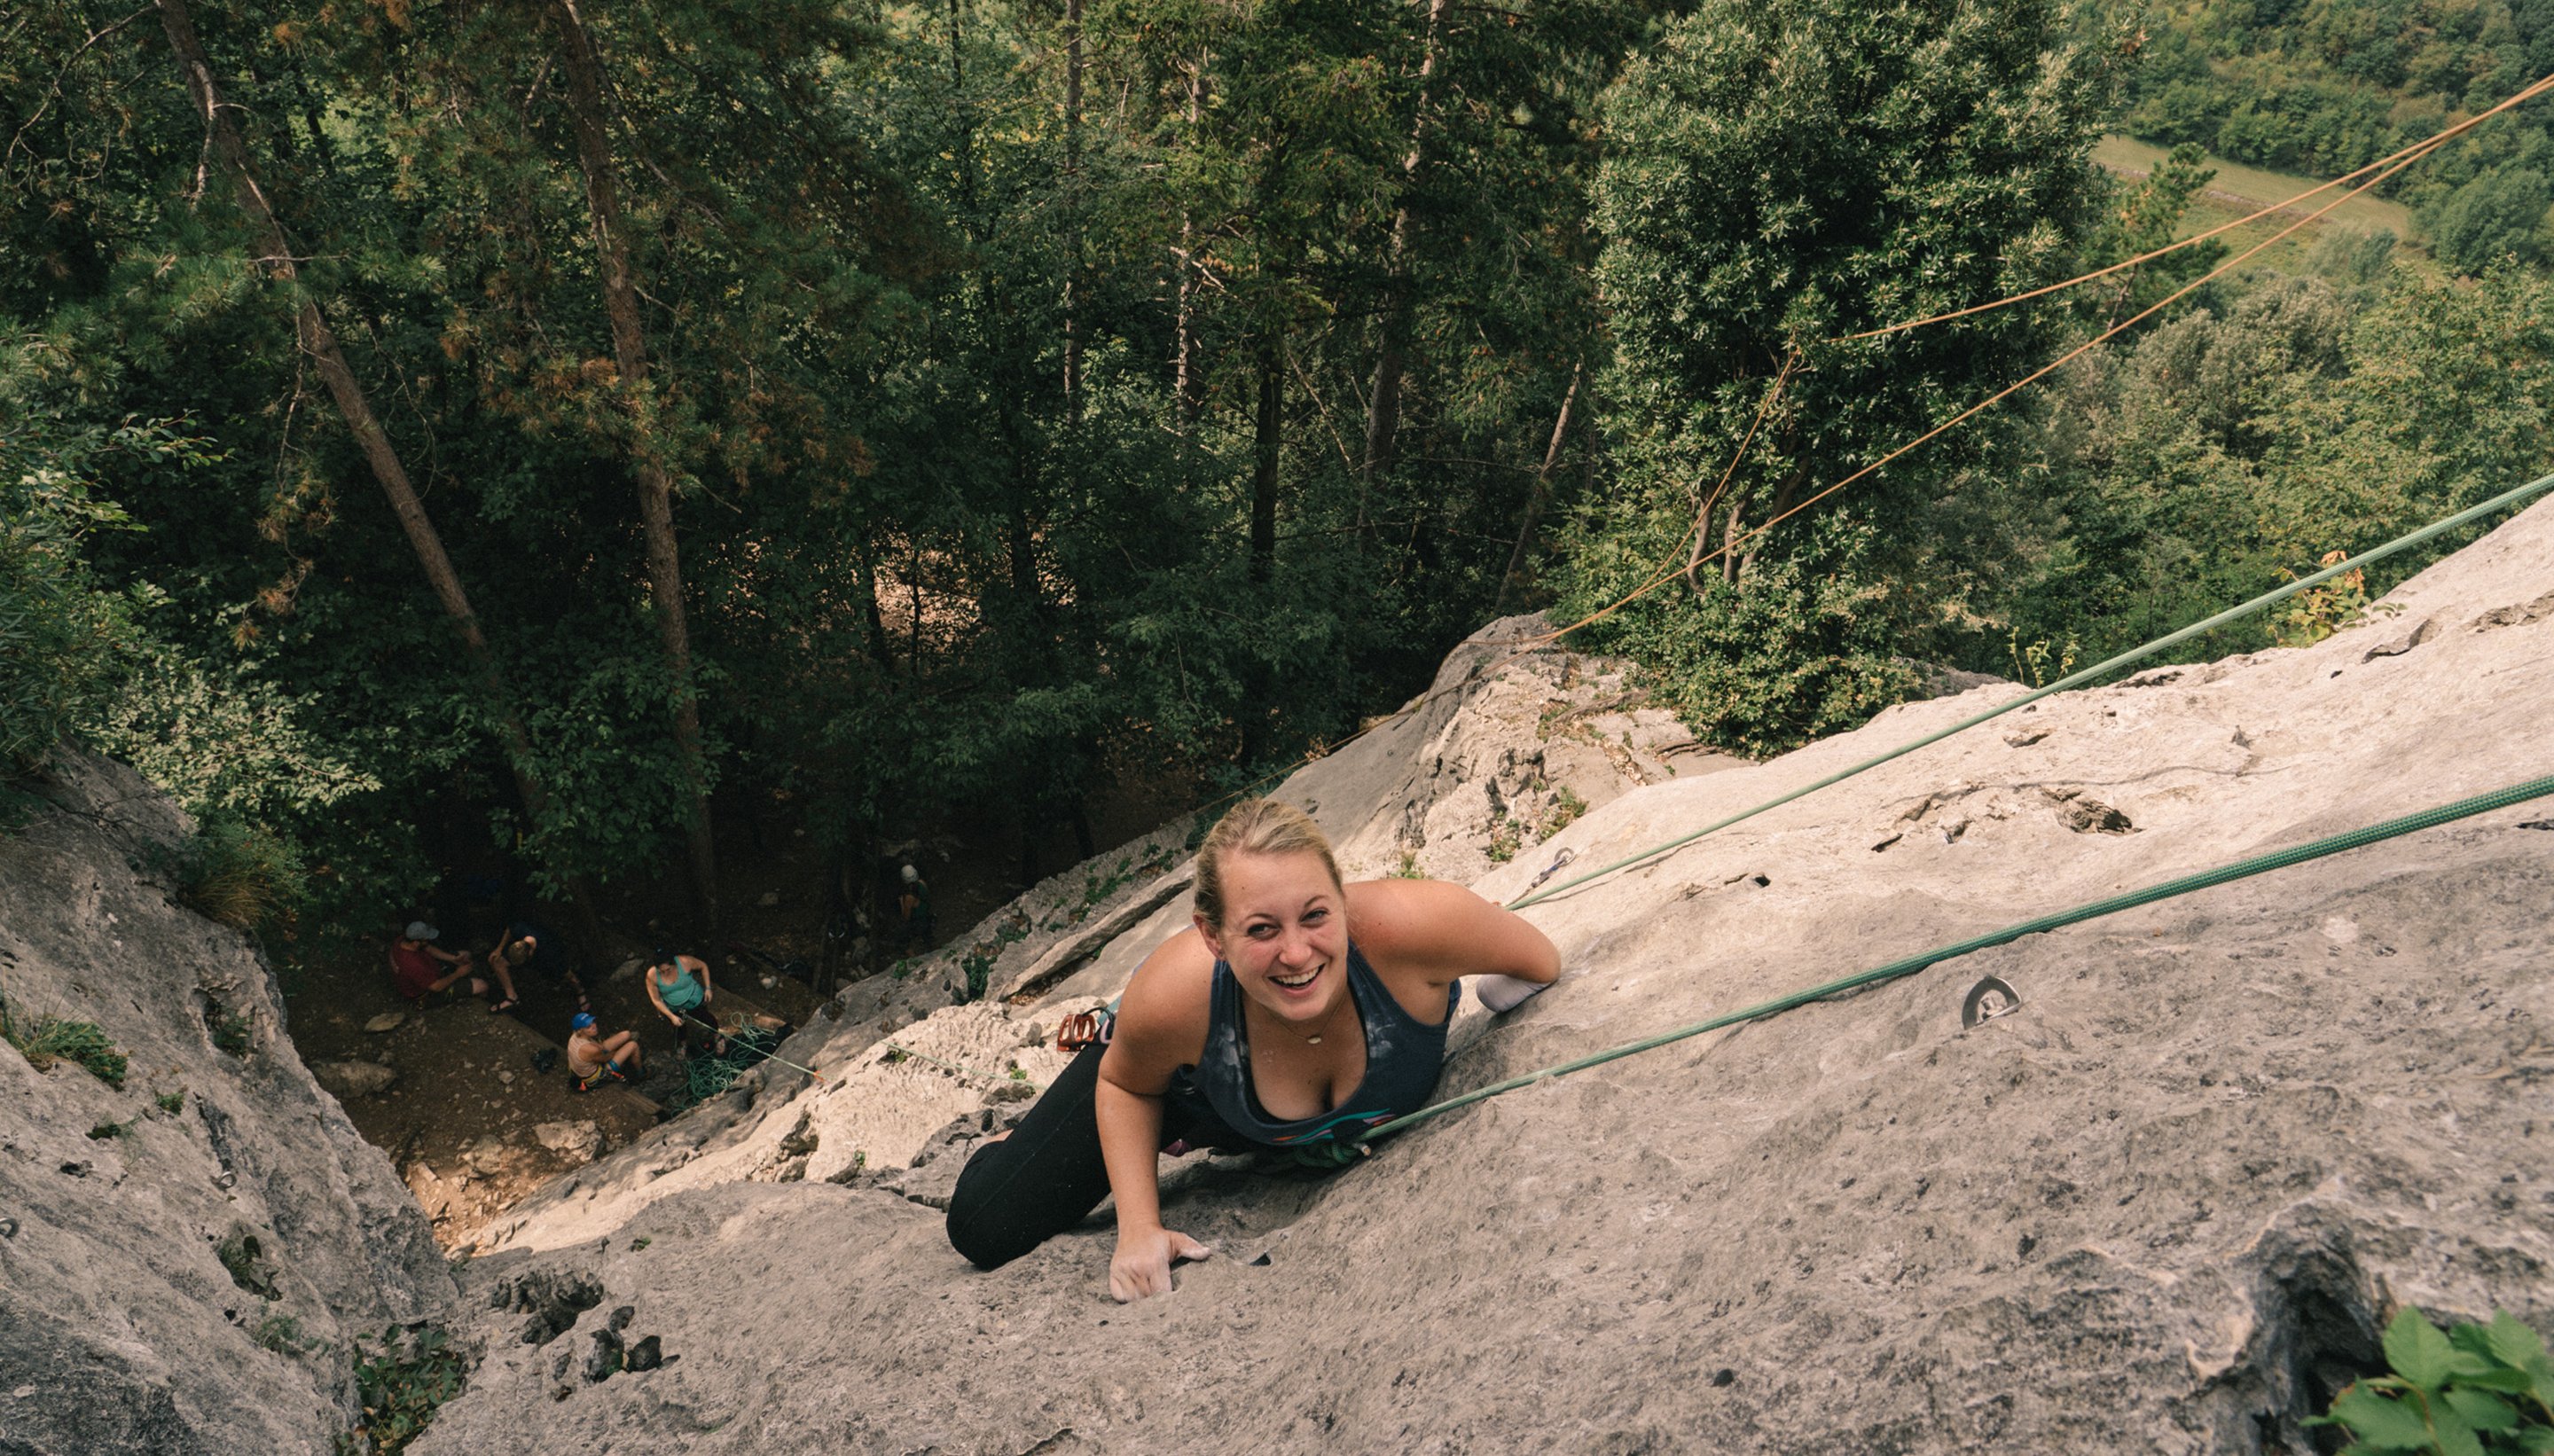 An amateur female climber smiles as she reaches the top of a wall.